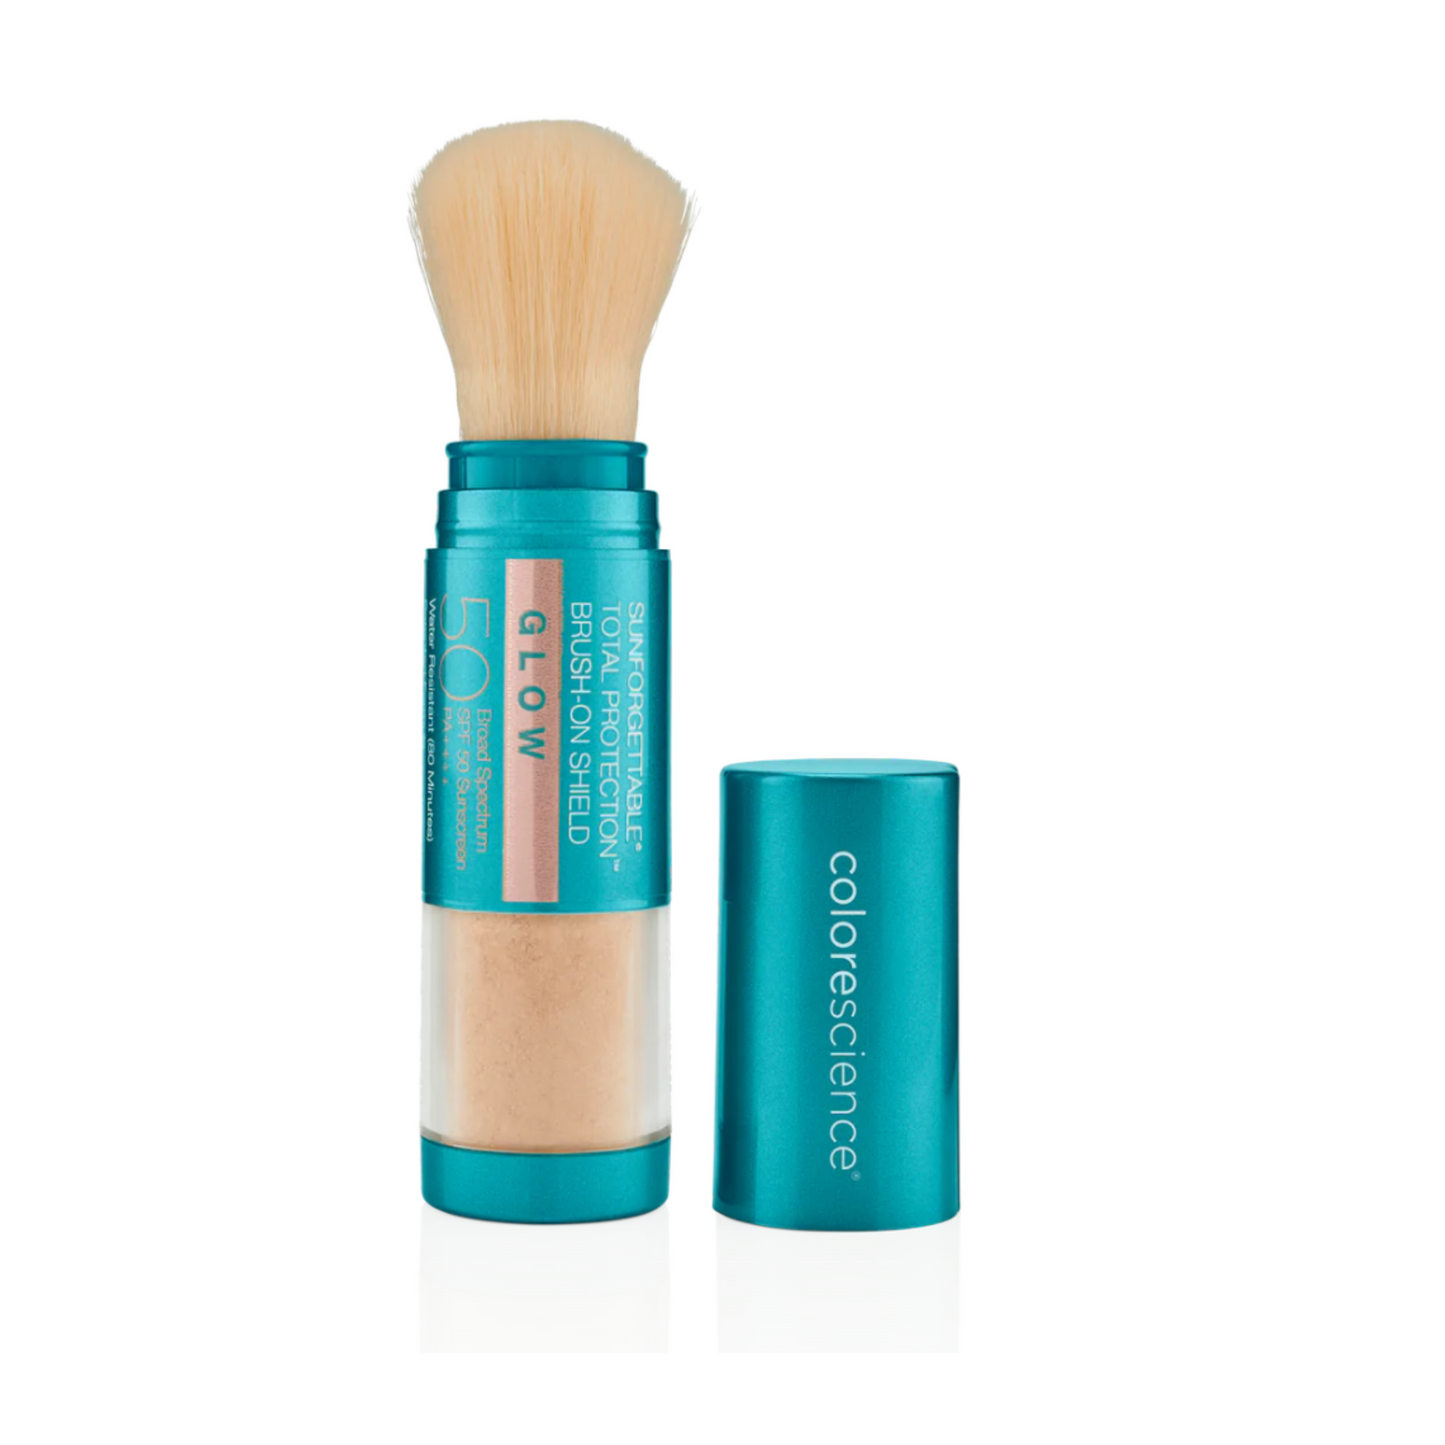 Sunforgettable® Total Protection Brush-On Shield Glow SPF 50